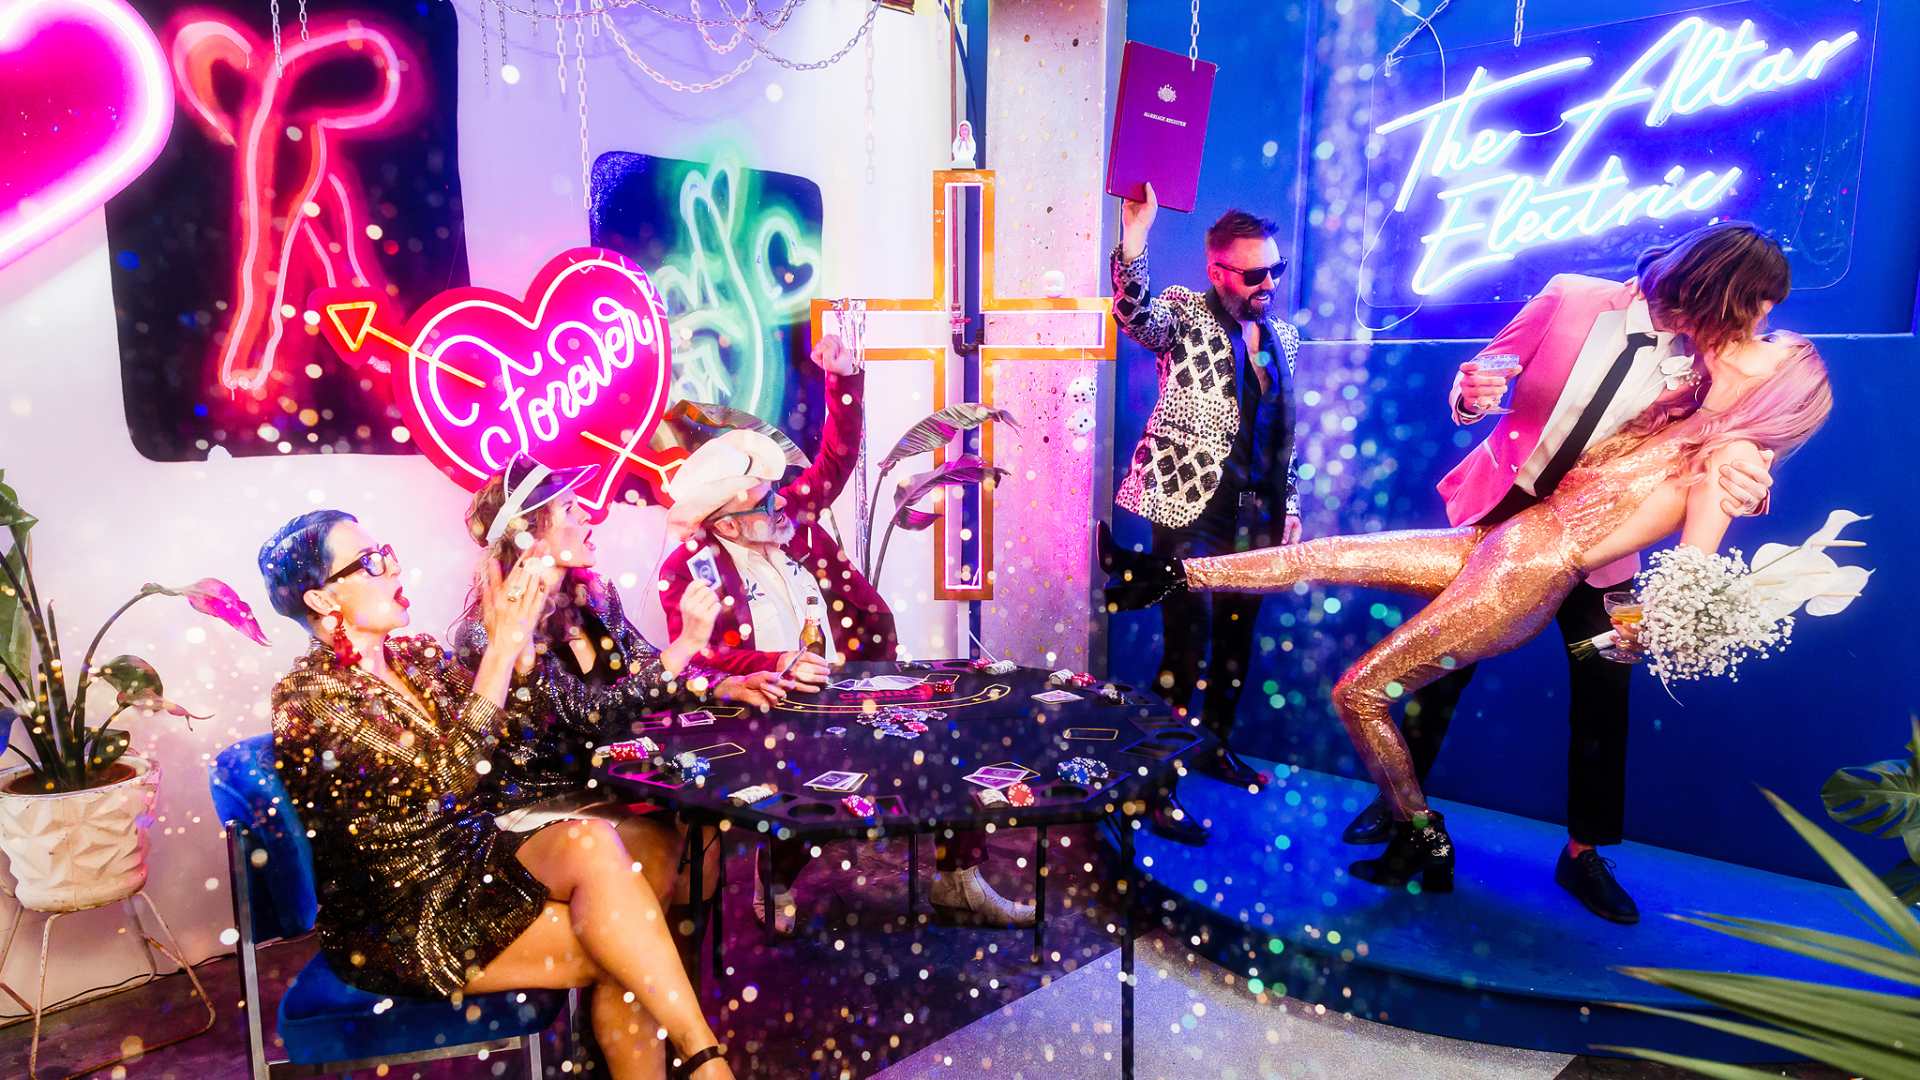 Collingwood Just Scored a Neon-Drenched Chapel for Raucous Vegas-Style Weddings